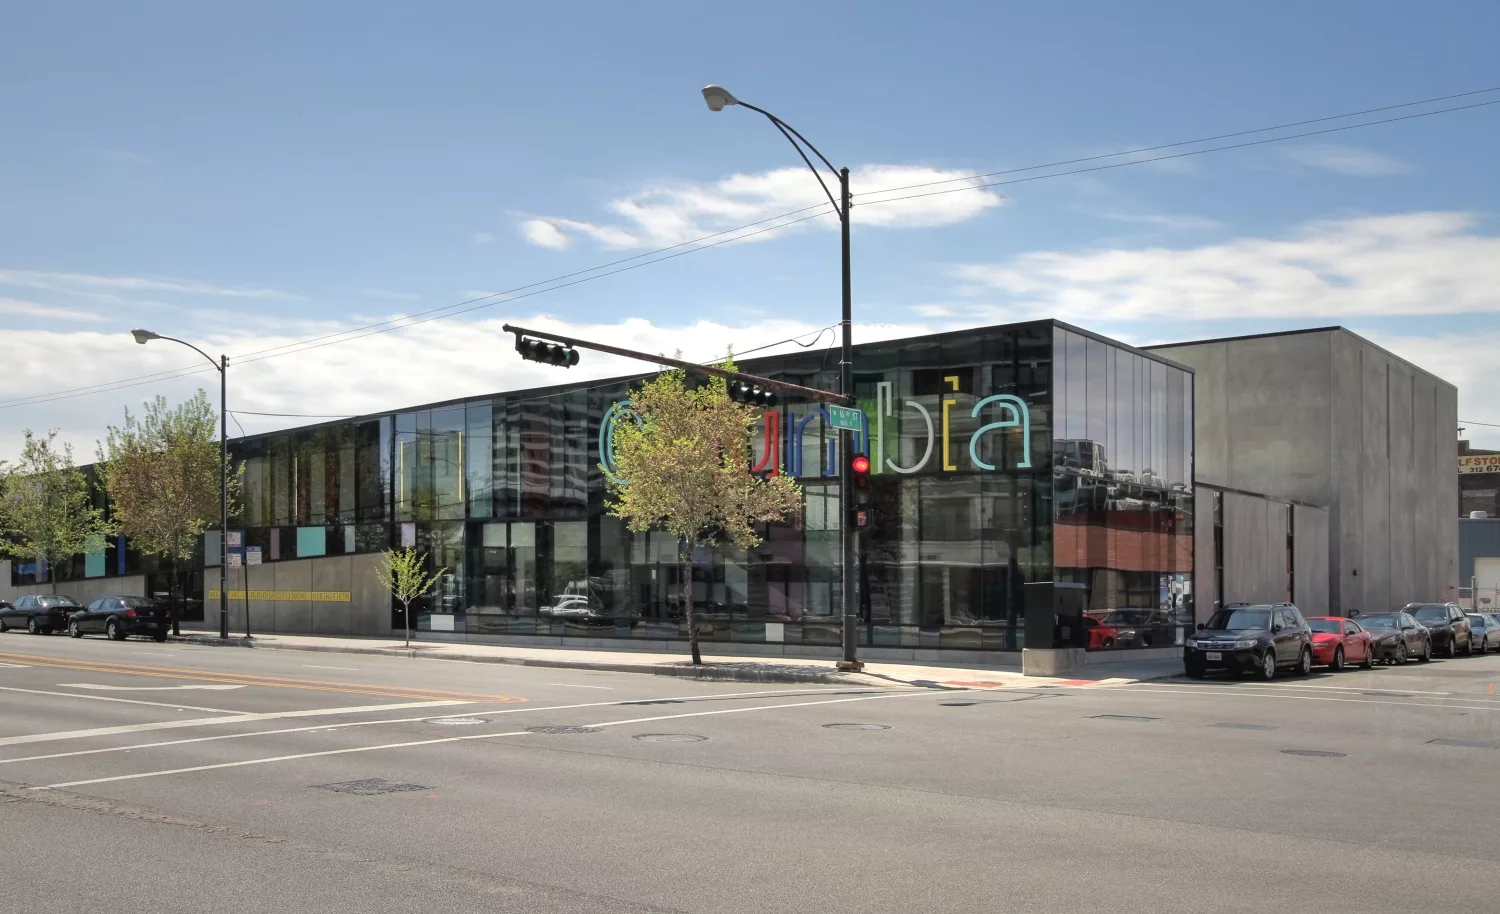 Exterior daylight view of the glass facade of the Columbia College Media Production Center with multi-colored signage and surrounded by parked vehicles